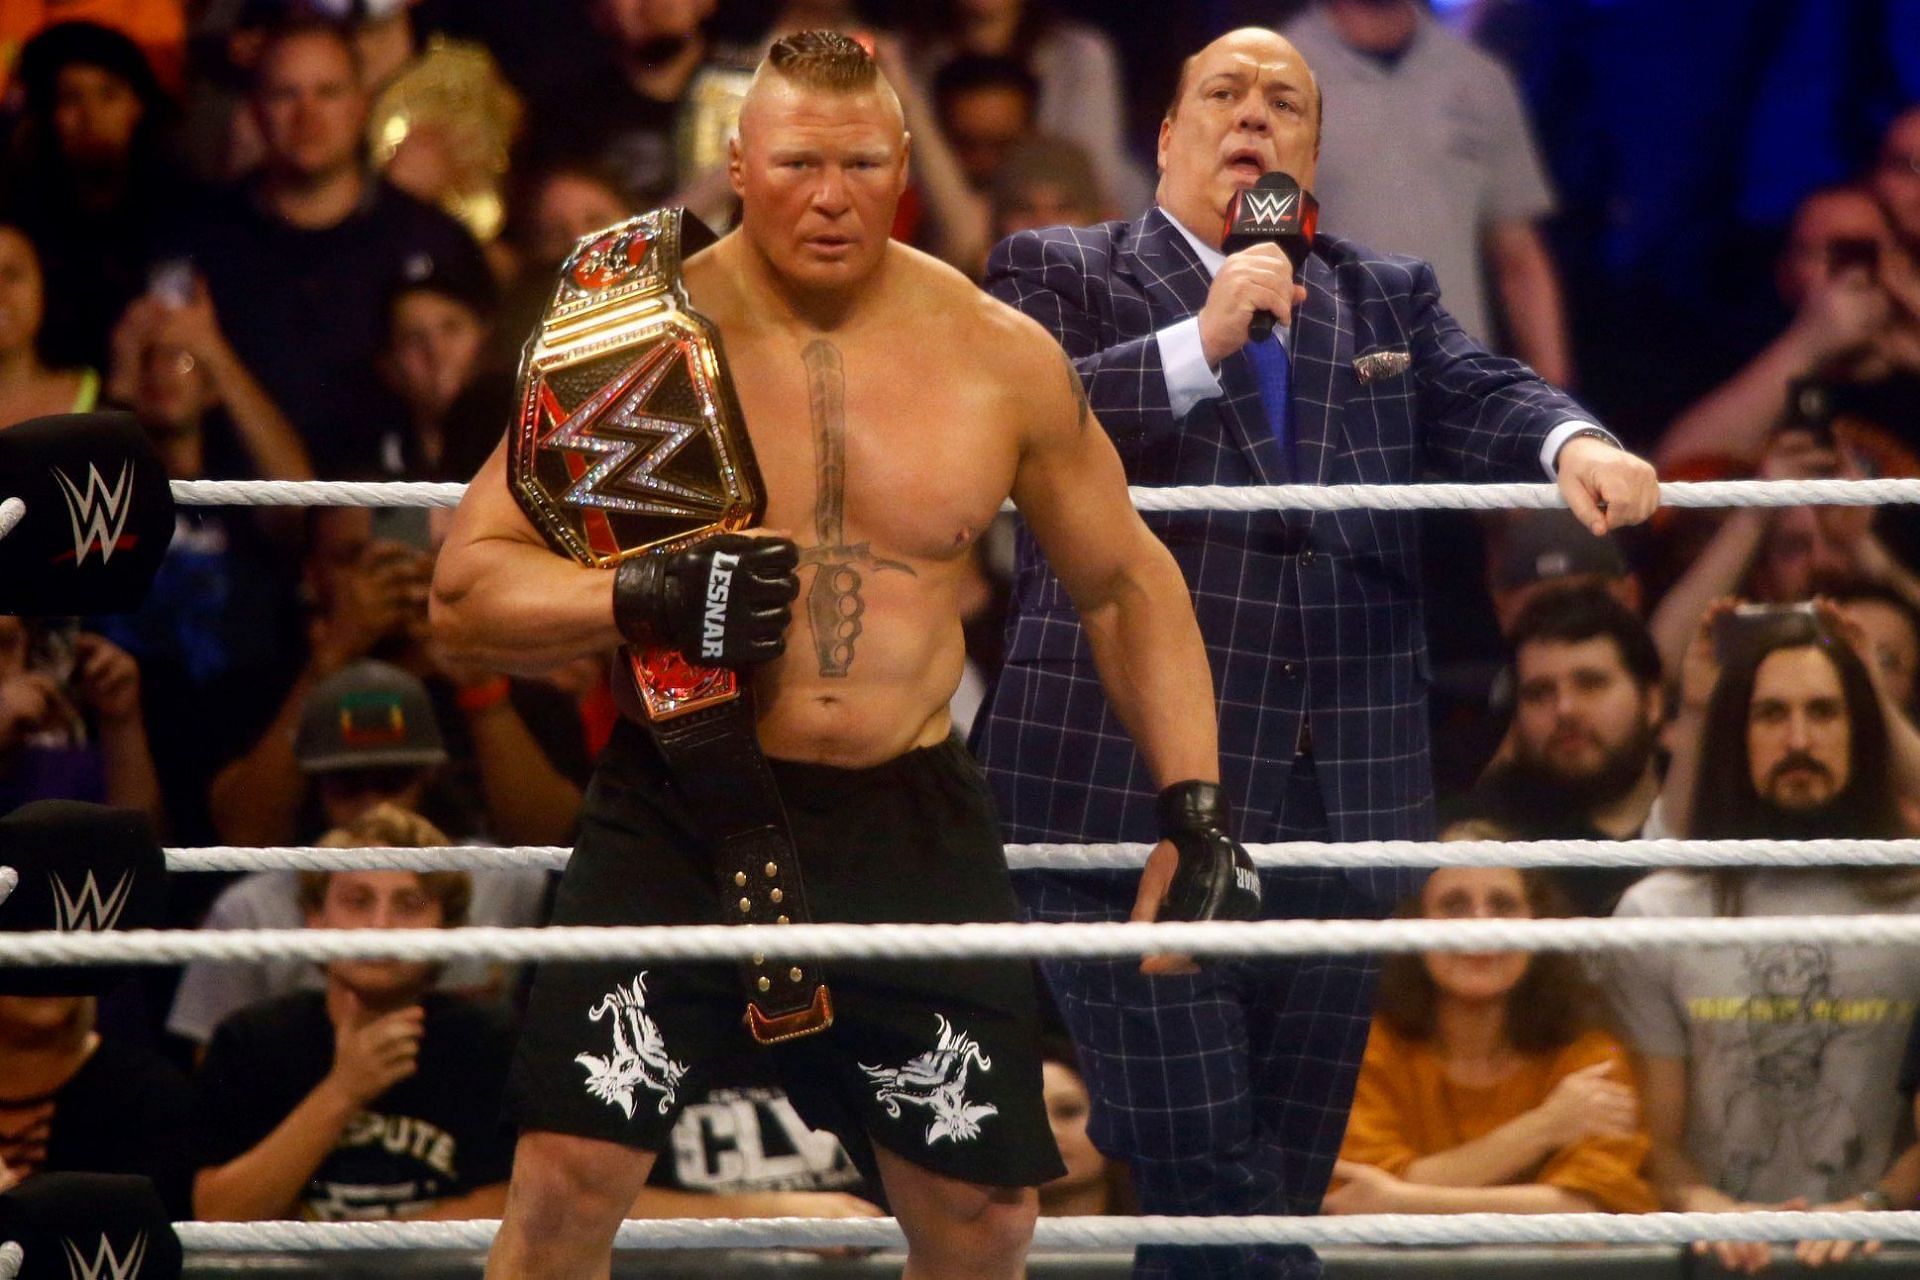 WWE Champion Brock Lesnar with his advocate Paul Heyman